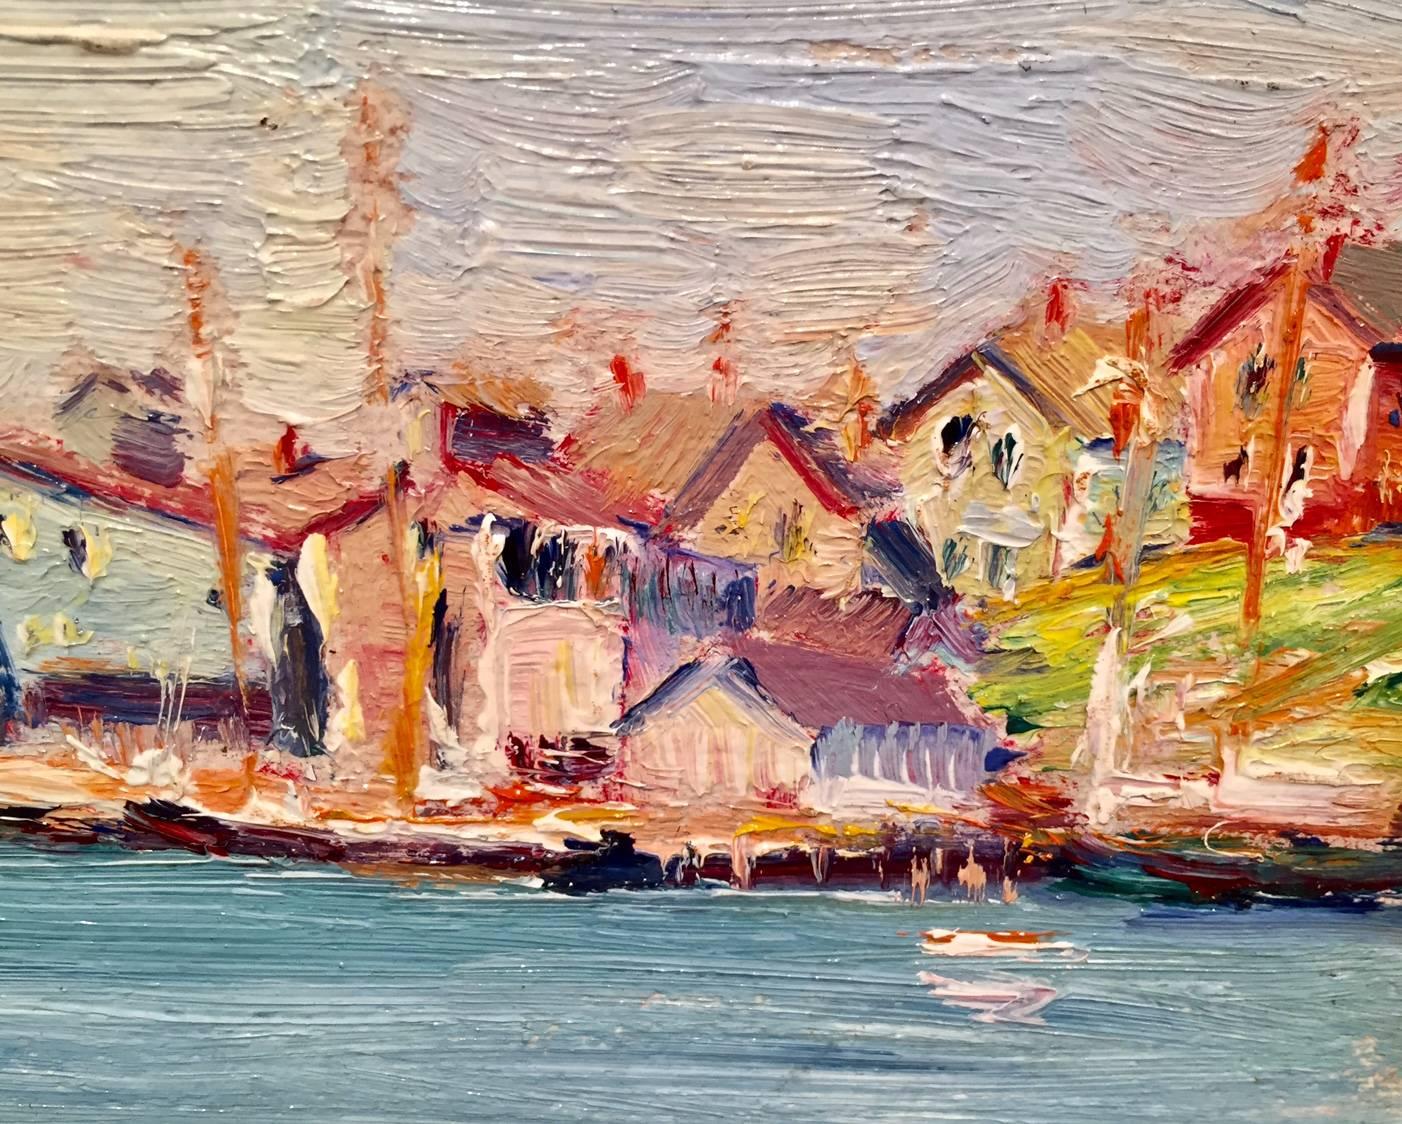 Sailing Out of Harbor - Impressionist Painting by Max Kuehne